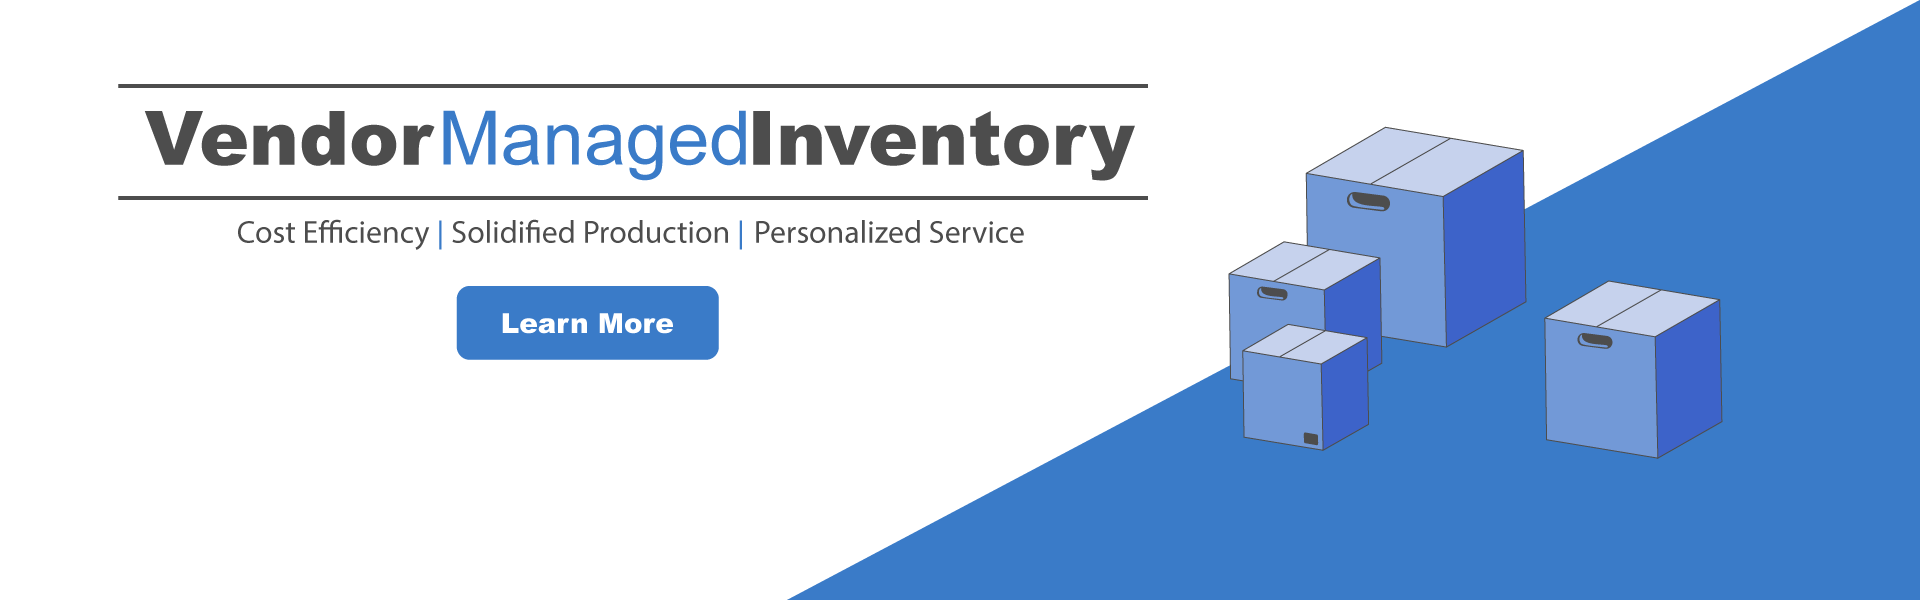 vmi, vendor managed inventory, cost efficiency, solid production, personalized service